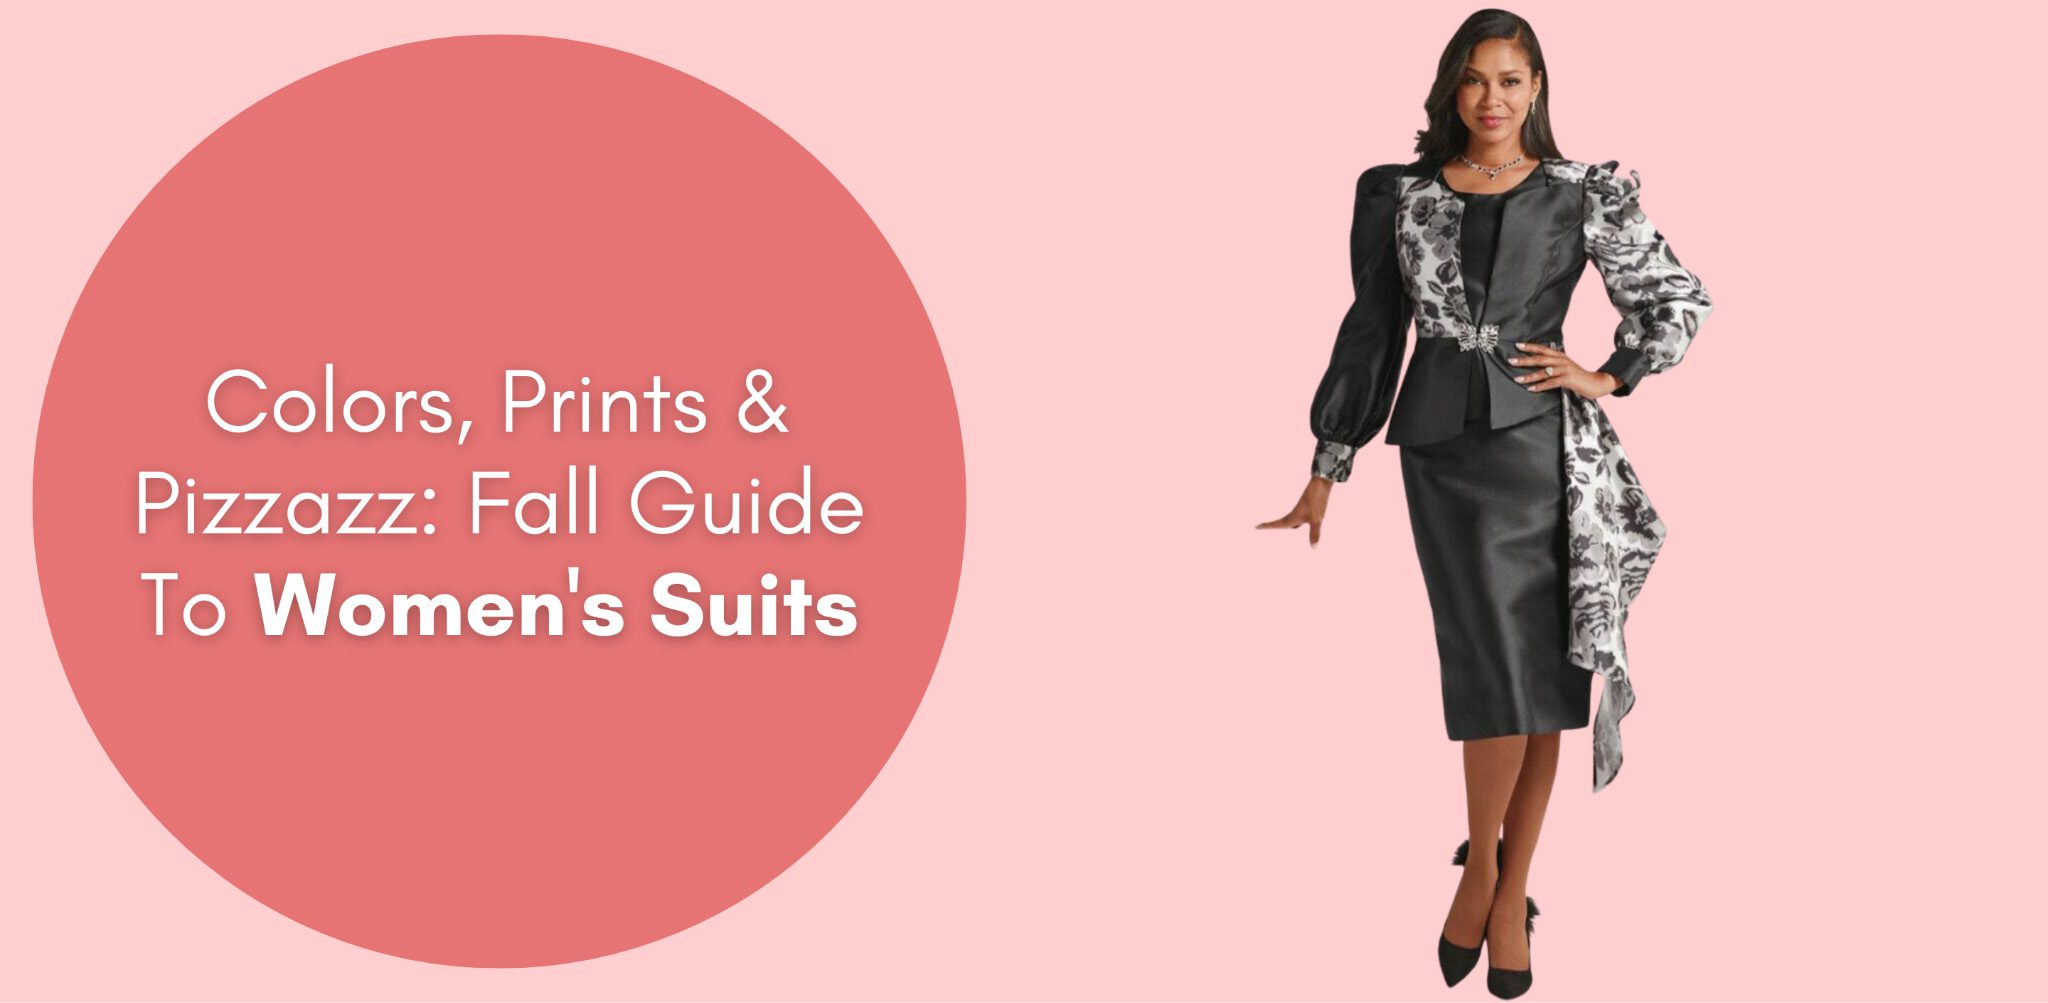 Colors, Prints & Pizzazz: Fall Guide To Women’s Suits